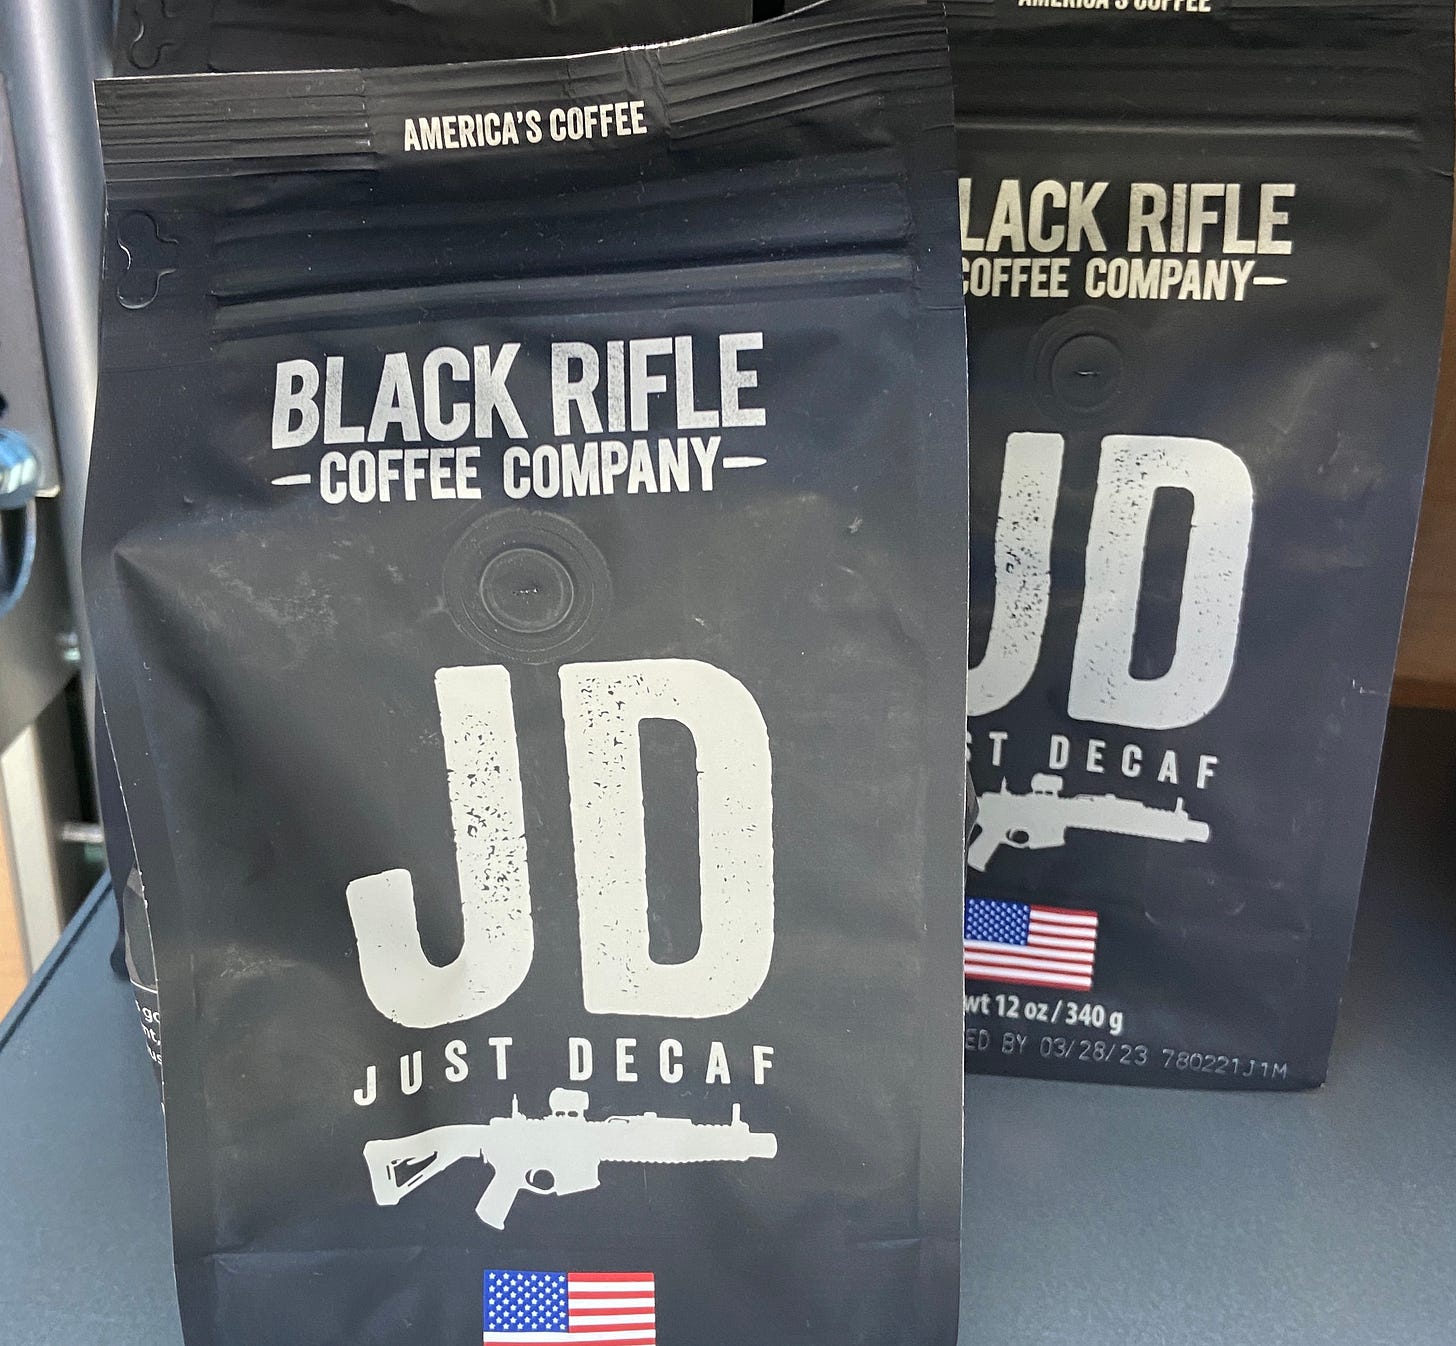 An image of a bag of coffee called "JD Just Decaf" with a graphic of the American flag and an assault rifle.